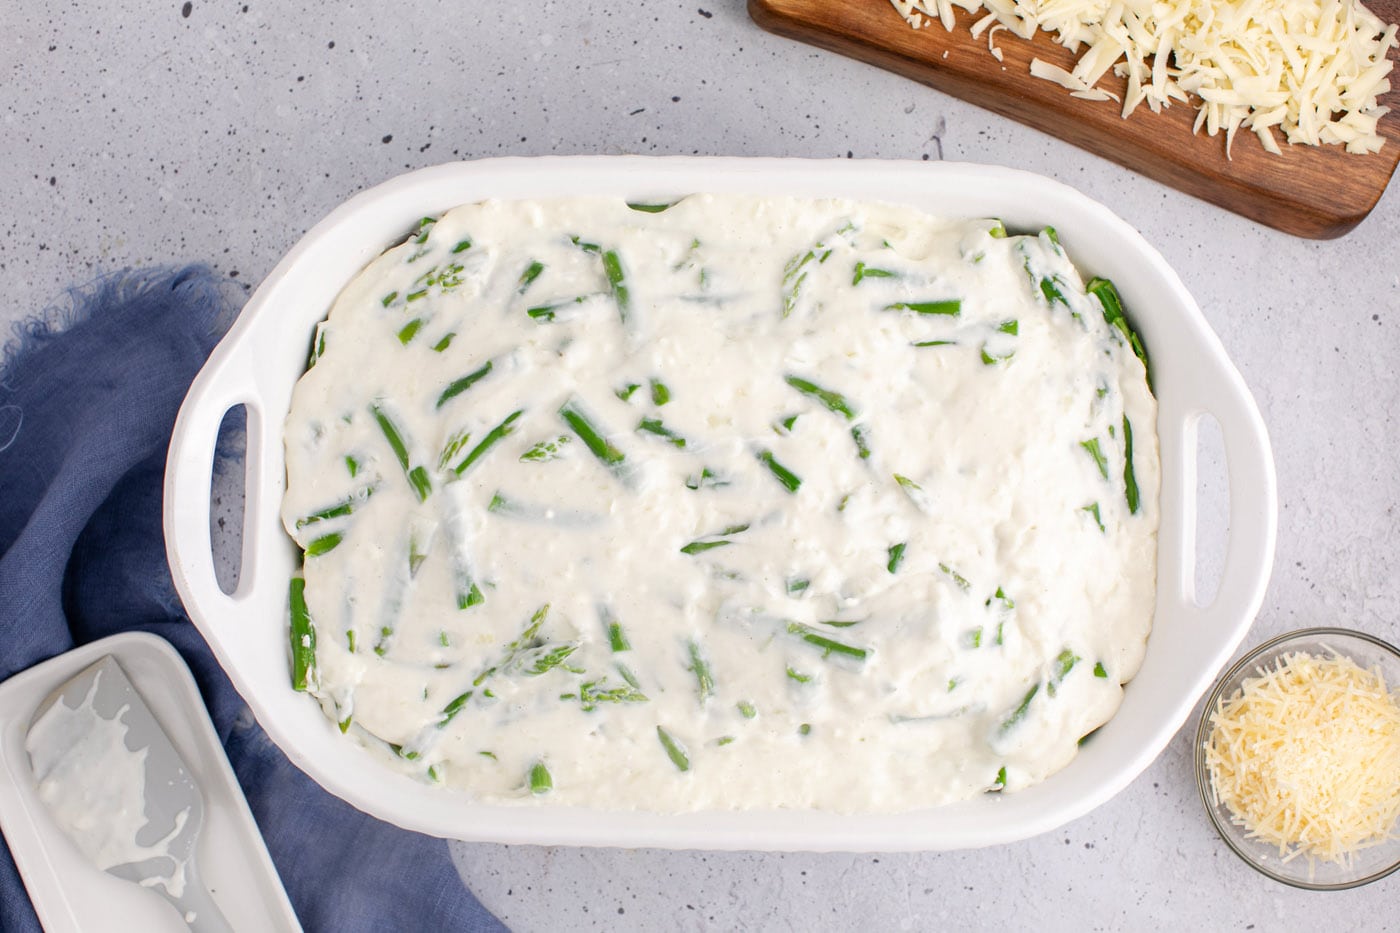 cheese sauce added to casserole dish of asparagus